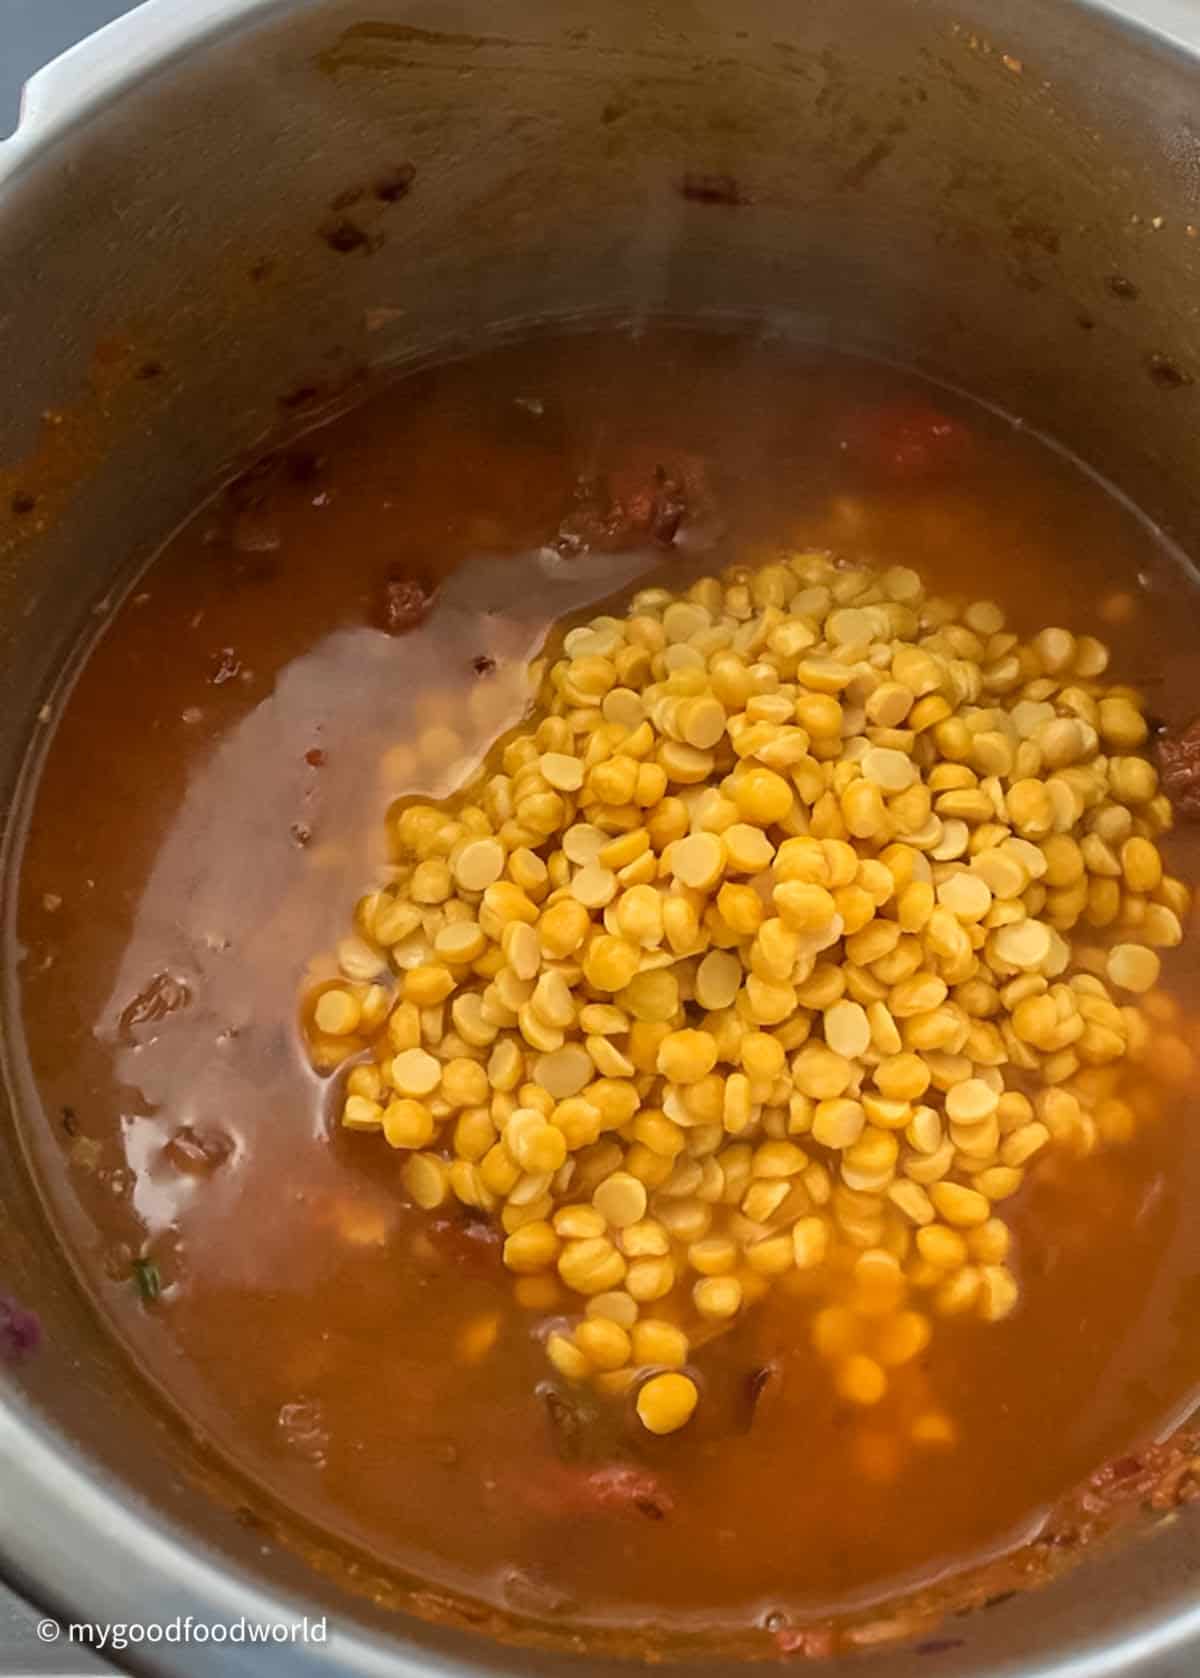 Chana dal is placed in a pot with some water for making a dish,